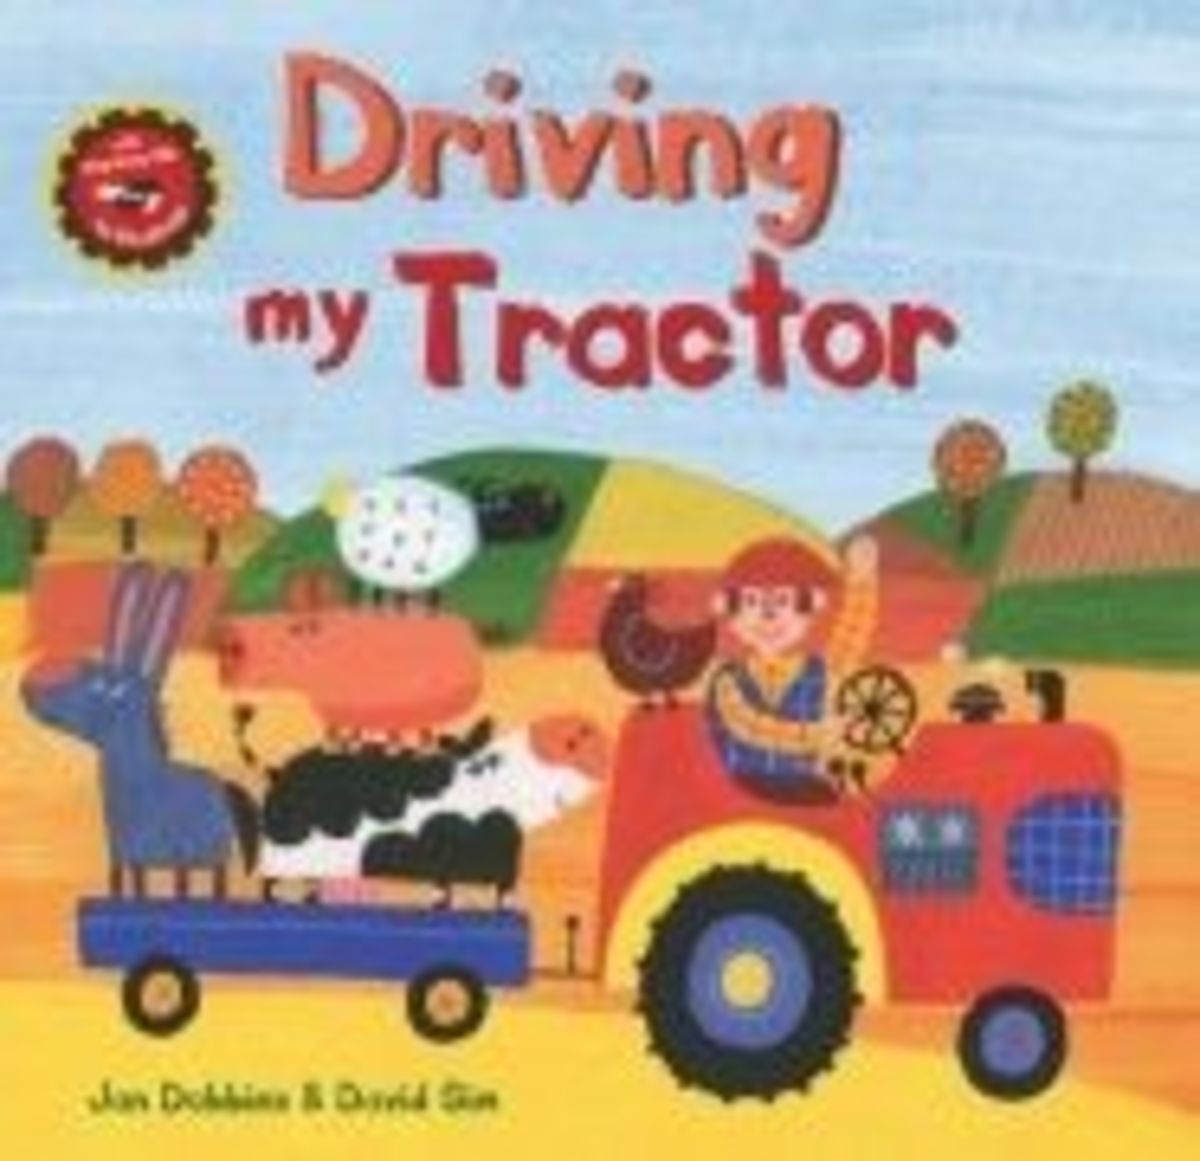 drivingmytractor